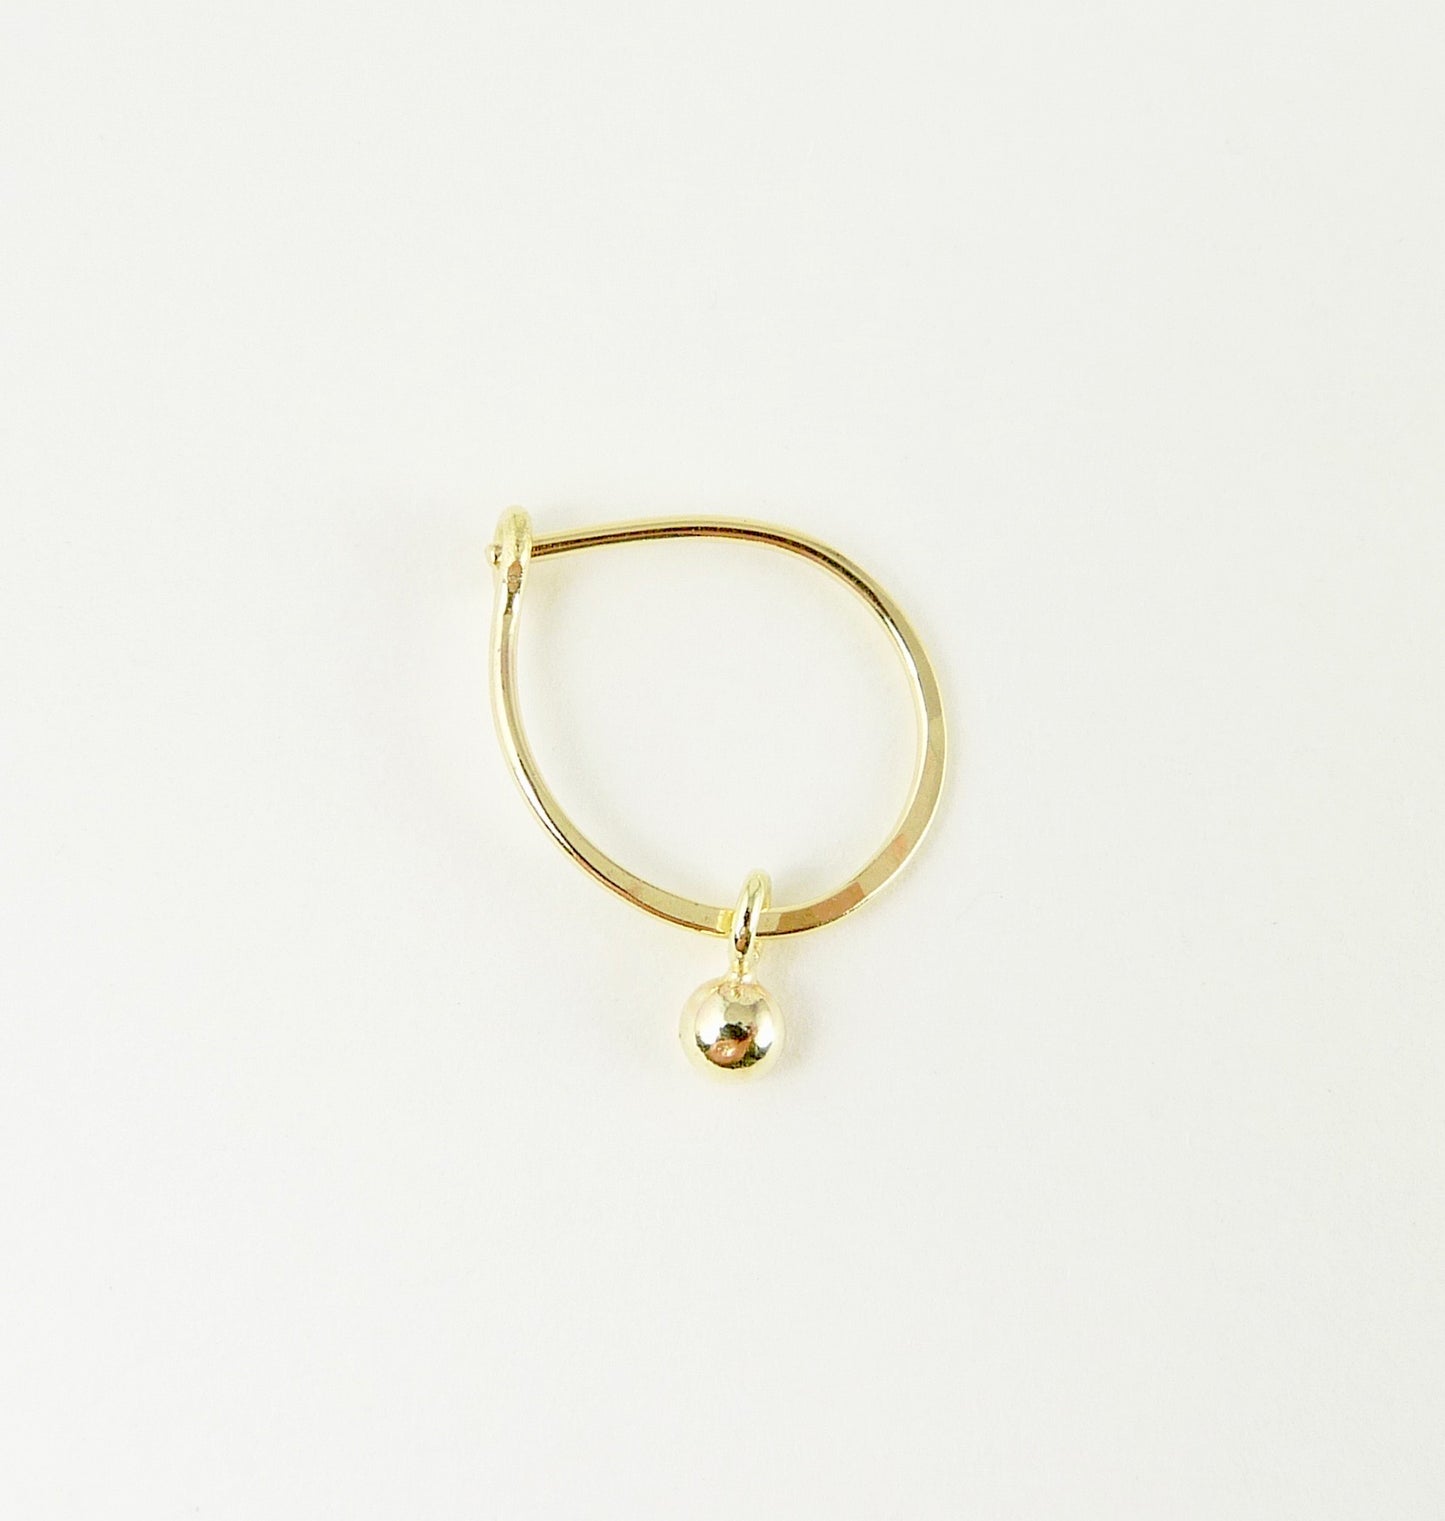 18ct Gold hoop earring with assorted gold charms